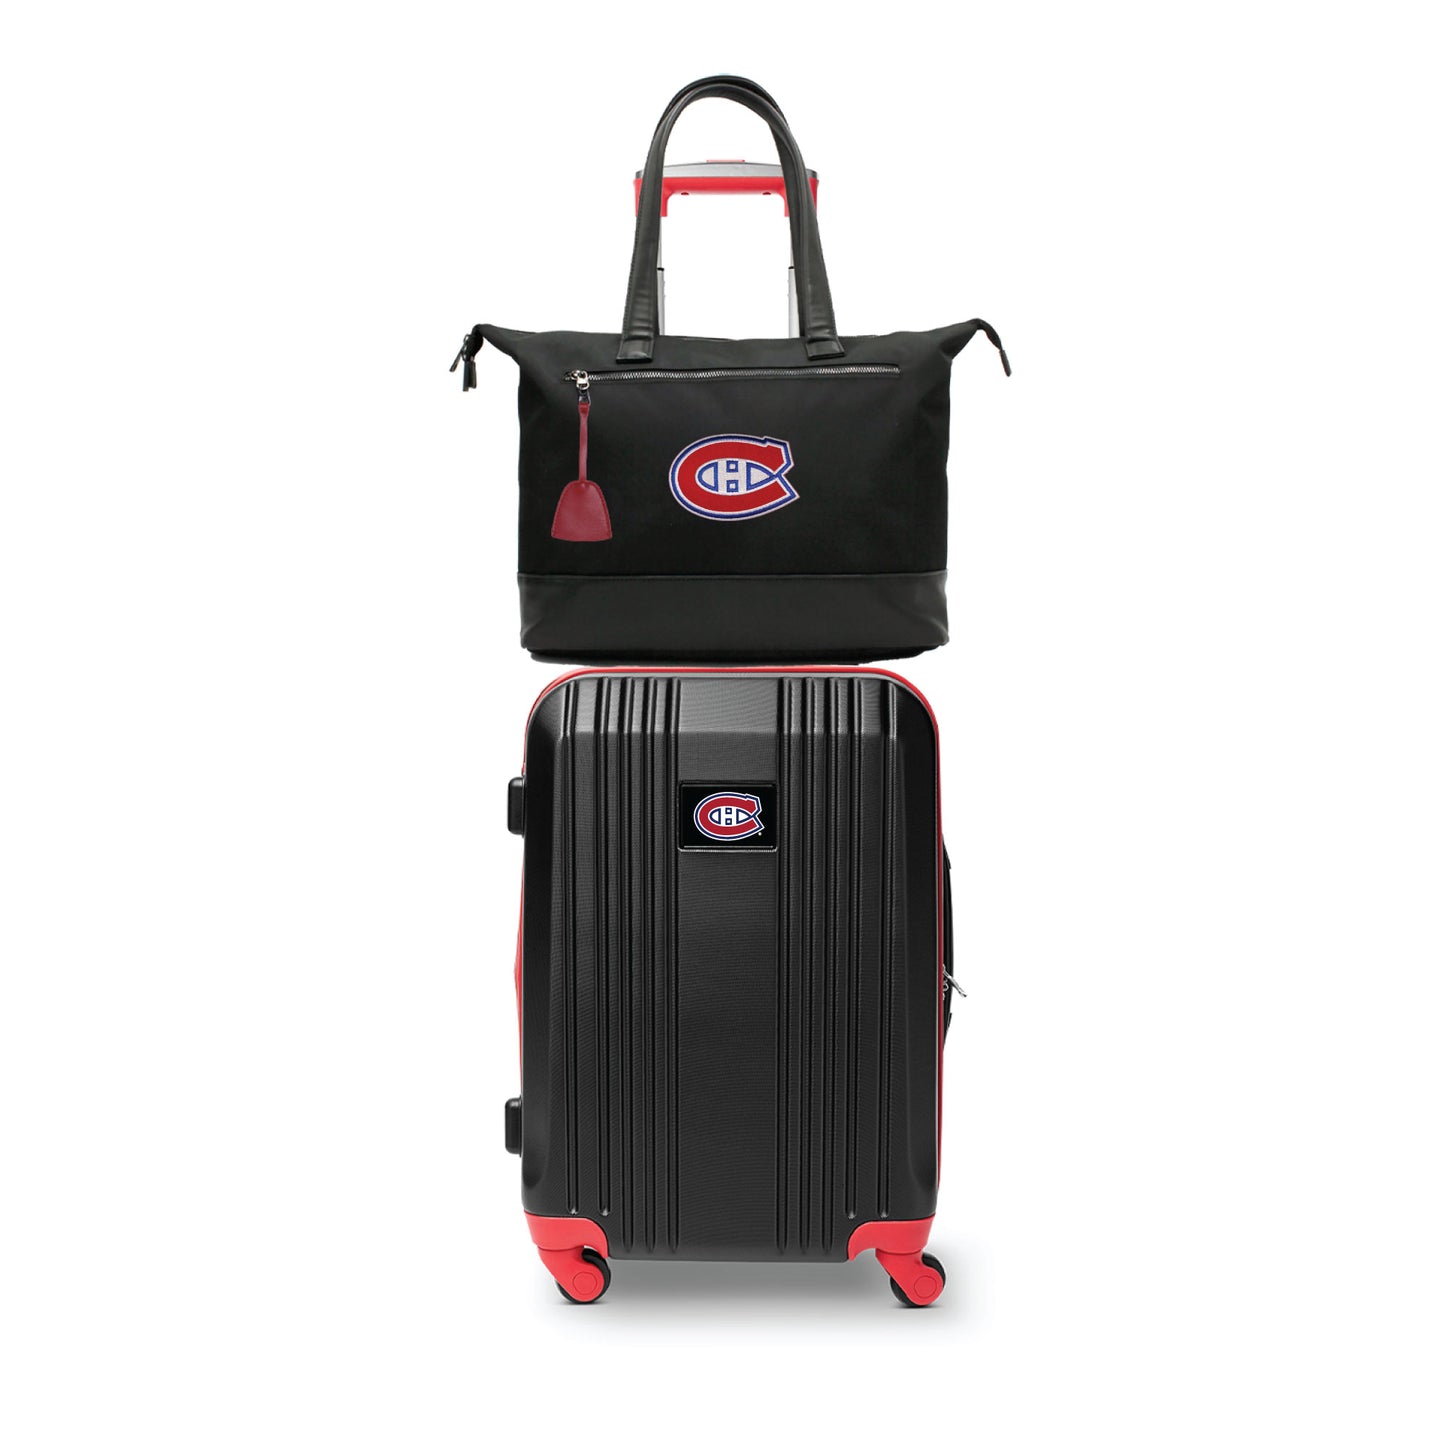 Montreal Canadians Premium Laptop Tote Bag and Luggage Set